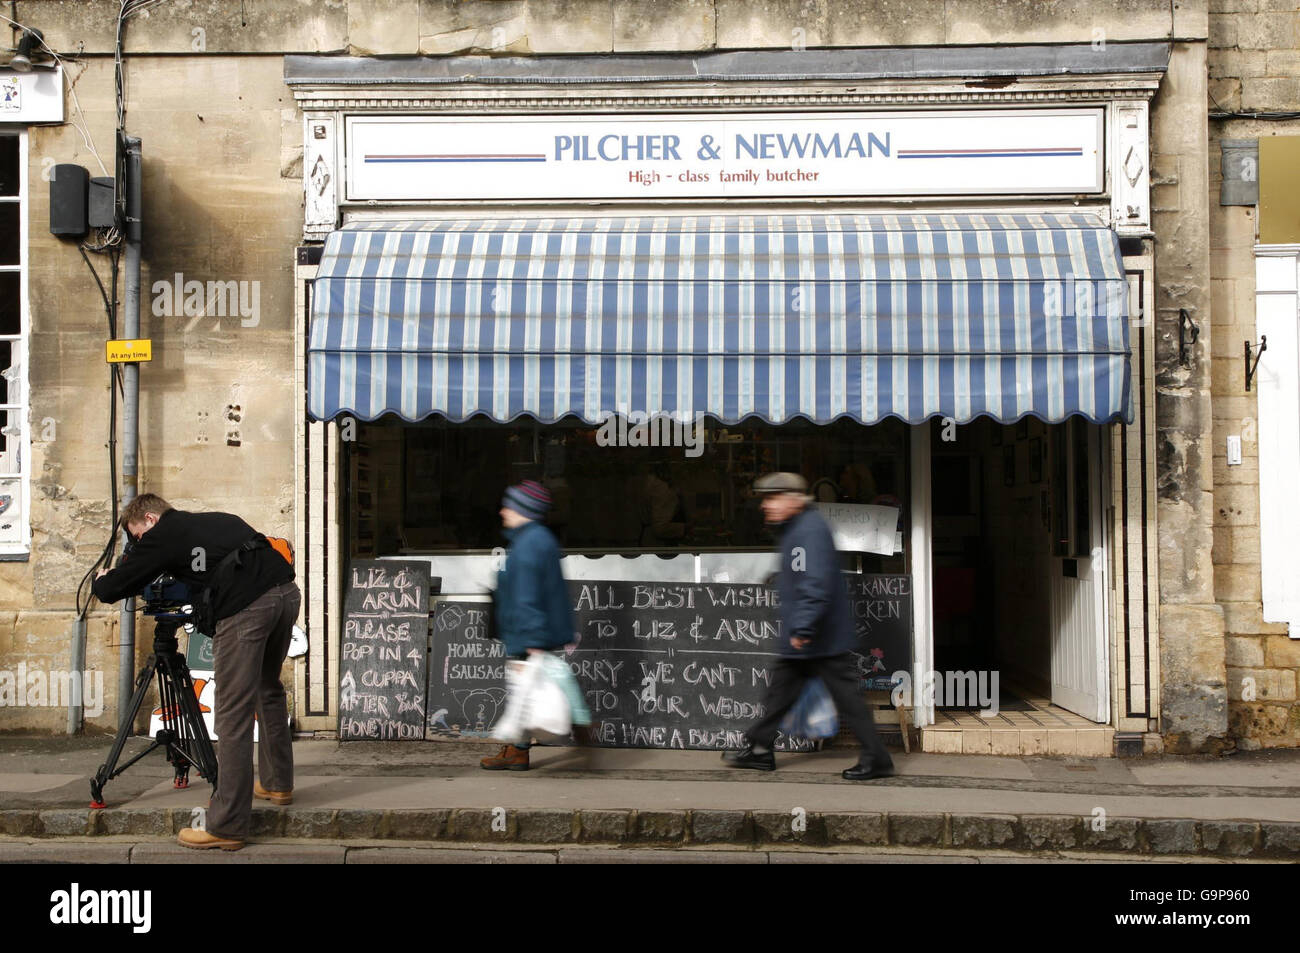 Signs outside butcher's shop Pilcher & Newman in Winchcombe, Gloucestershire, on the day after Liz Hurley, 41, wed 42-year-old Indian businessman Arun Nayar in nearby Sudeley Castle. Stock Photo